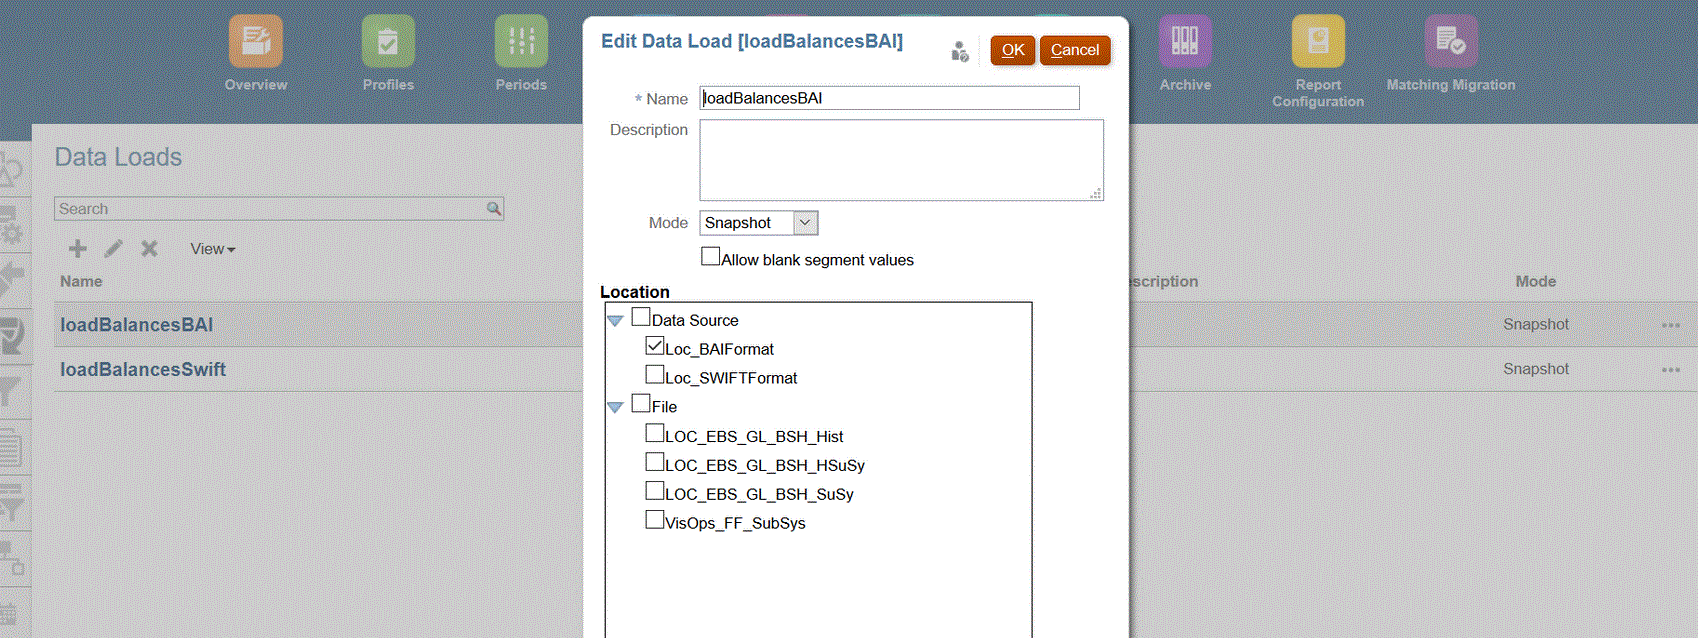 Image shows the Data Load page.